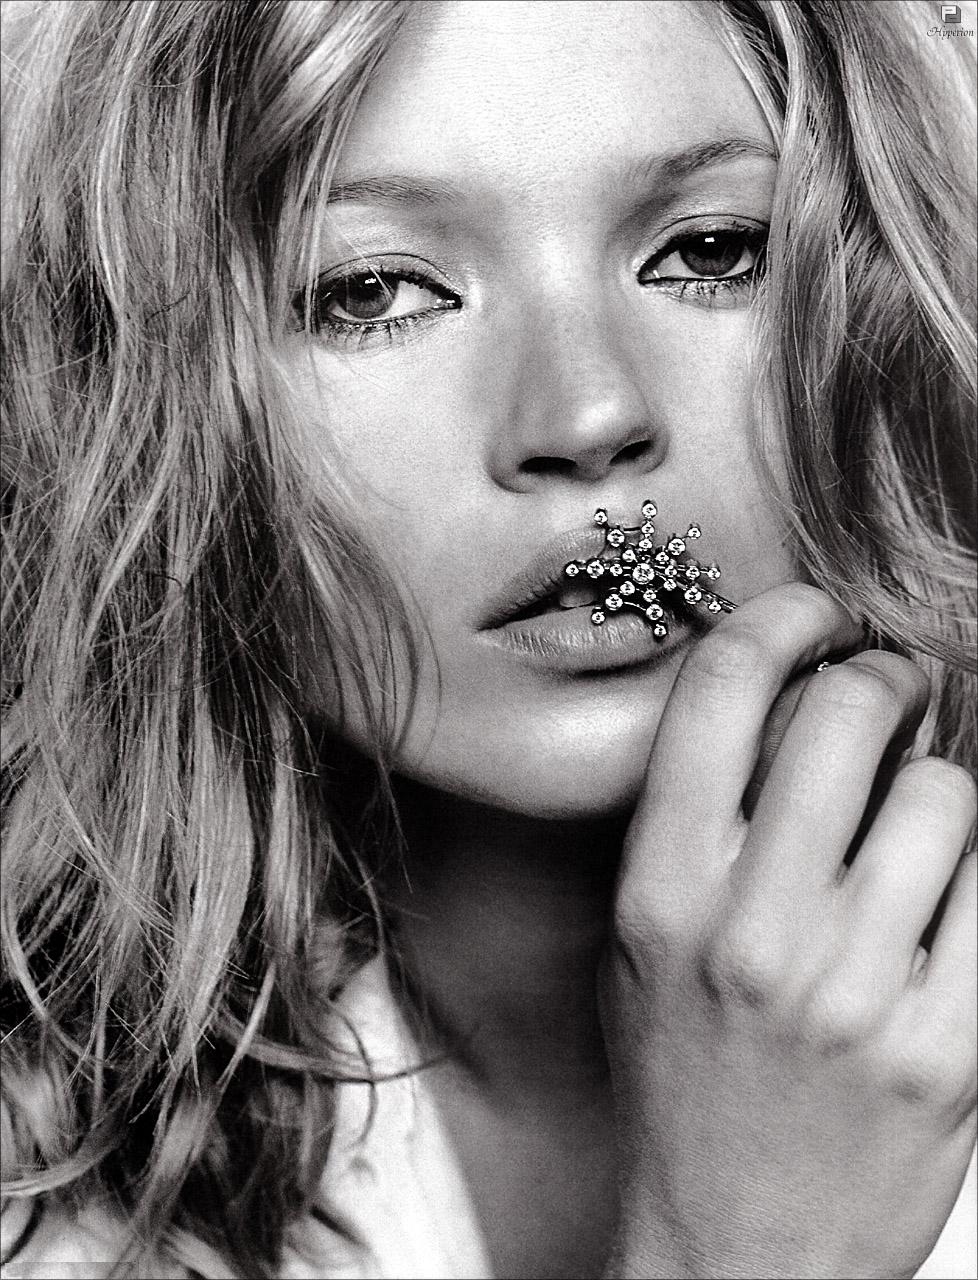 Kate Moss photo 819 of 2303 pics, wallpaper - photo #363889 - ThePlace2